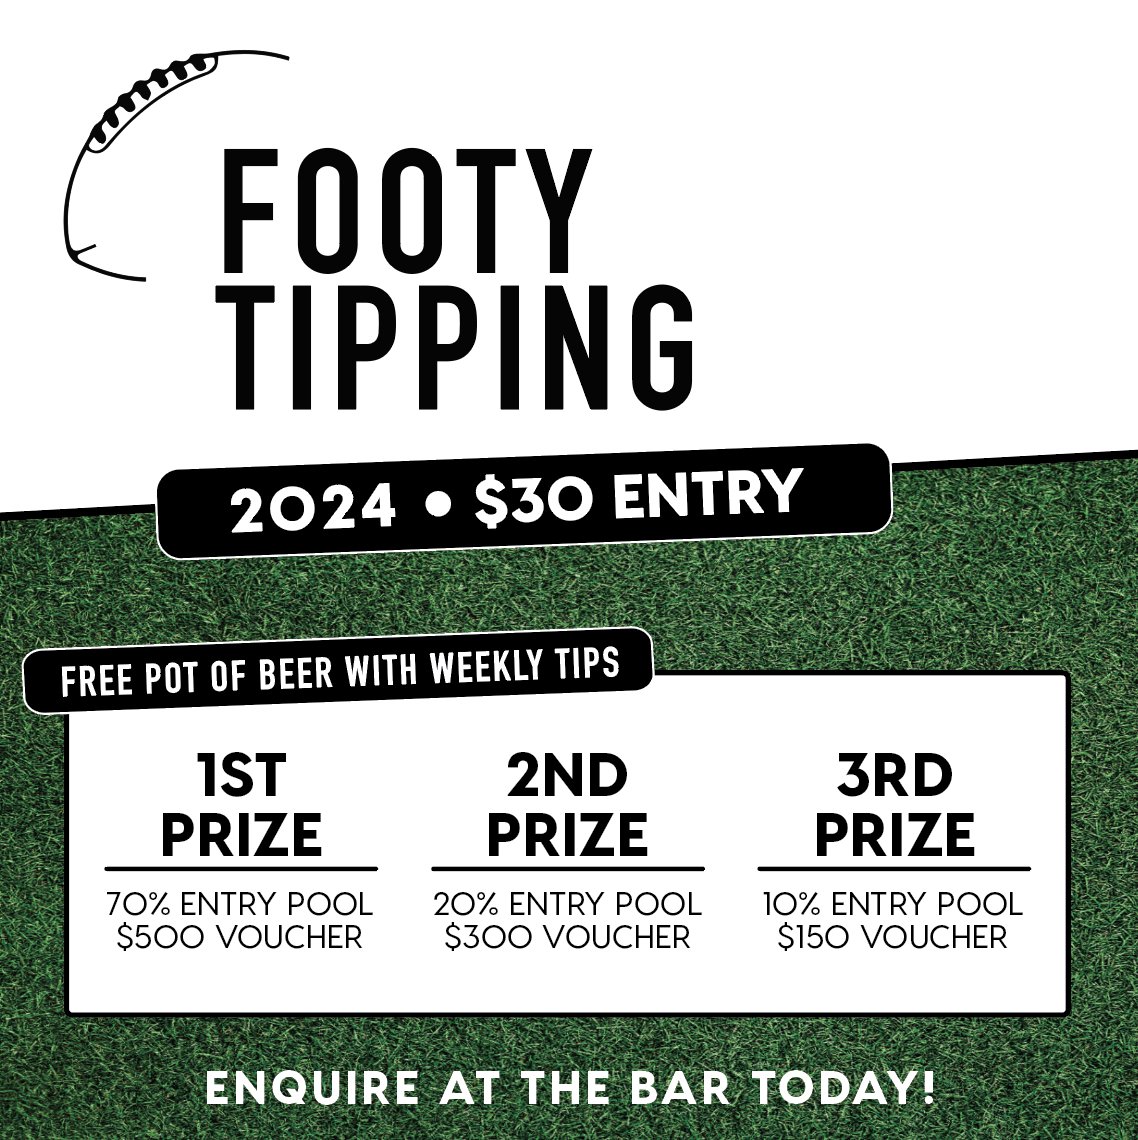 Footy Tipping 2024